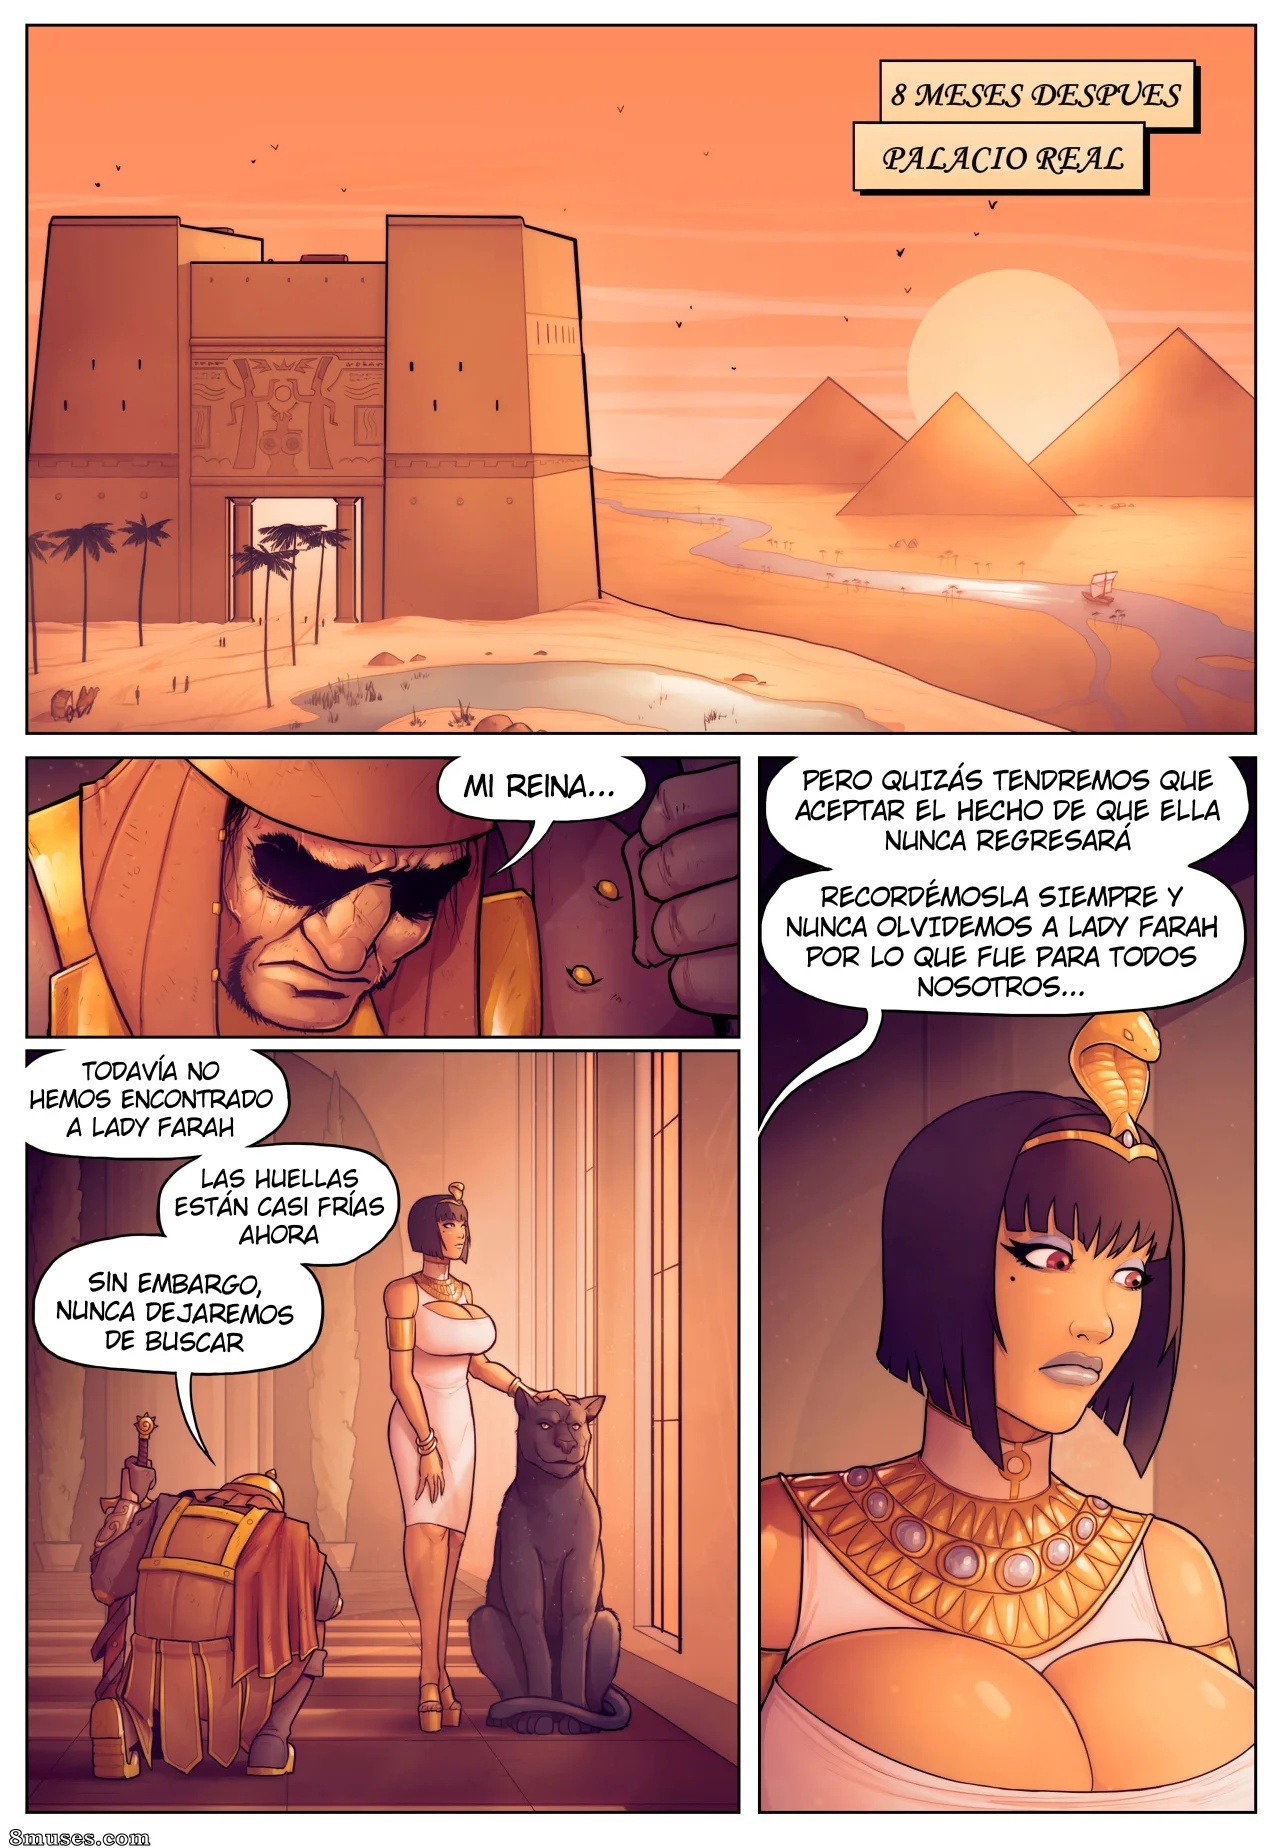 1 - Legend of Queen Opala -Tales of Pharah IN THE SHADOW OF ANUBIS I - 13